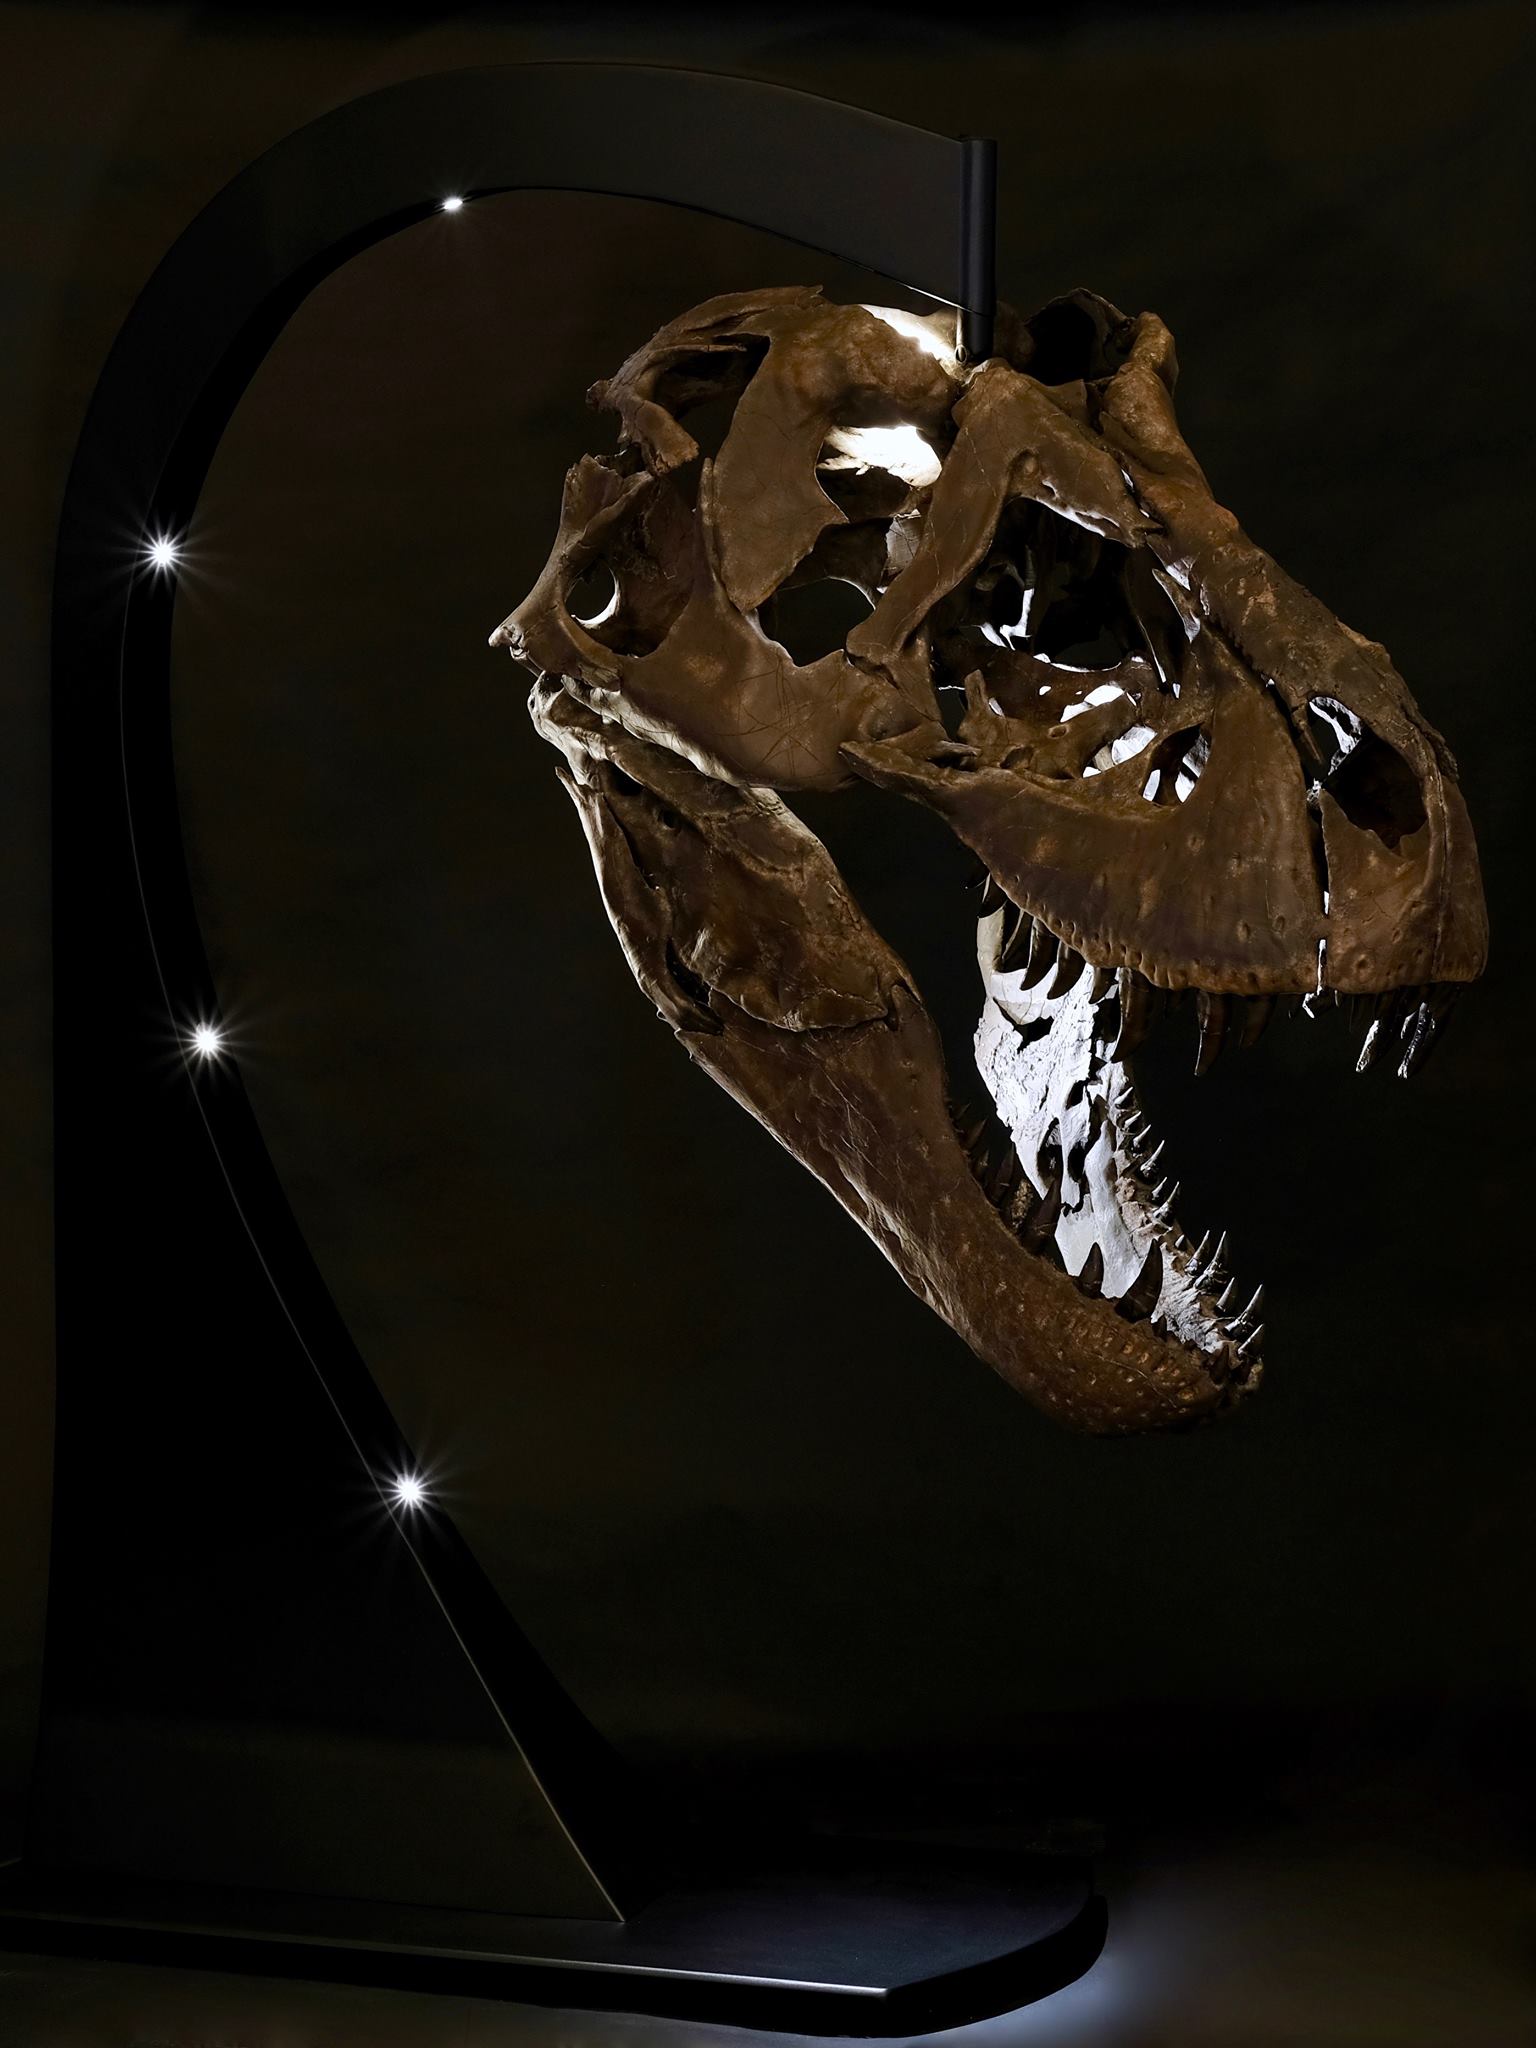 Tyrannosaurus rex - skull  This is the first cast of Victoria’s skull. It was placed on a beautiful, illuminated stand and will soon be available for everyone to see.    (approx. 65 million years old)